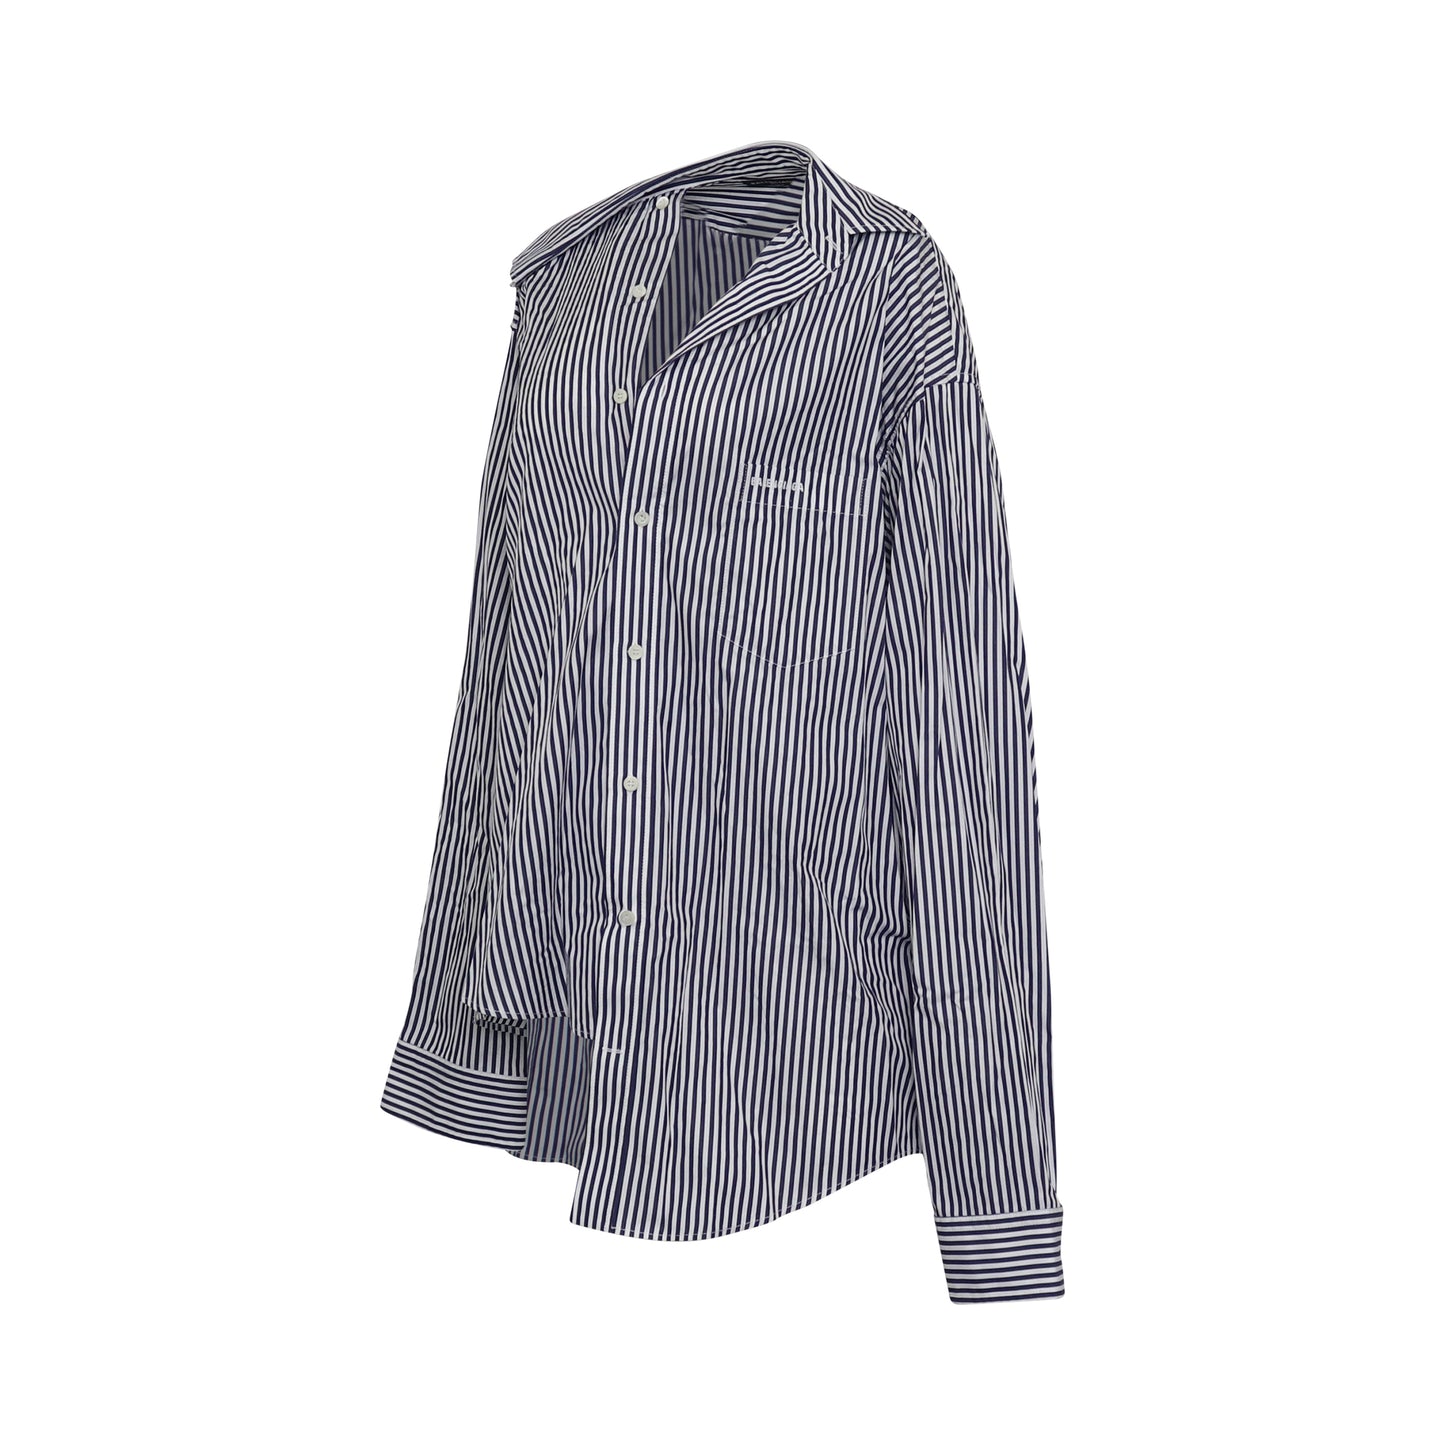 Twisted Stripe Shirt in Navy